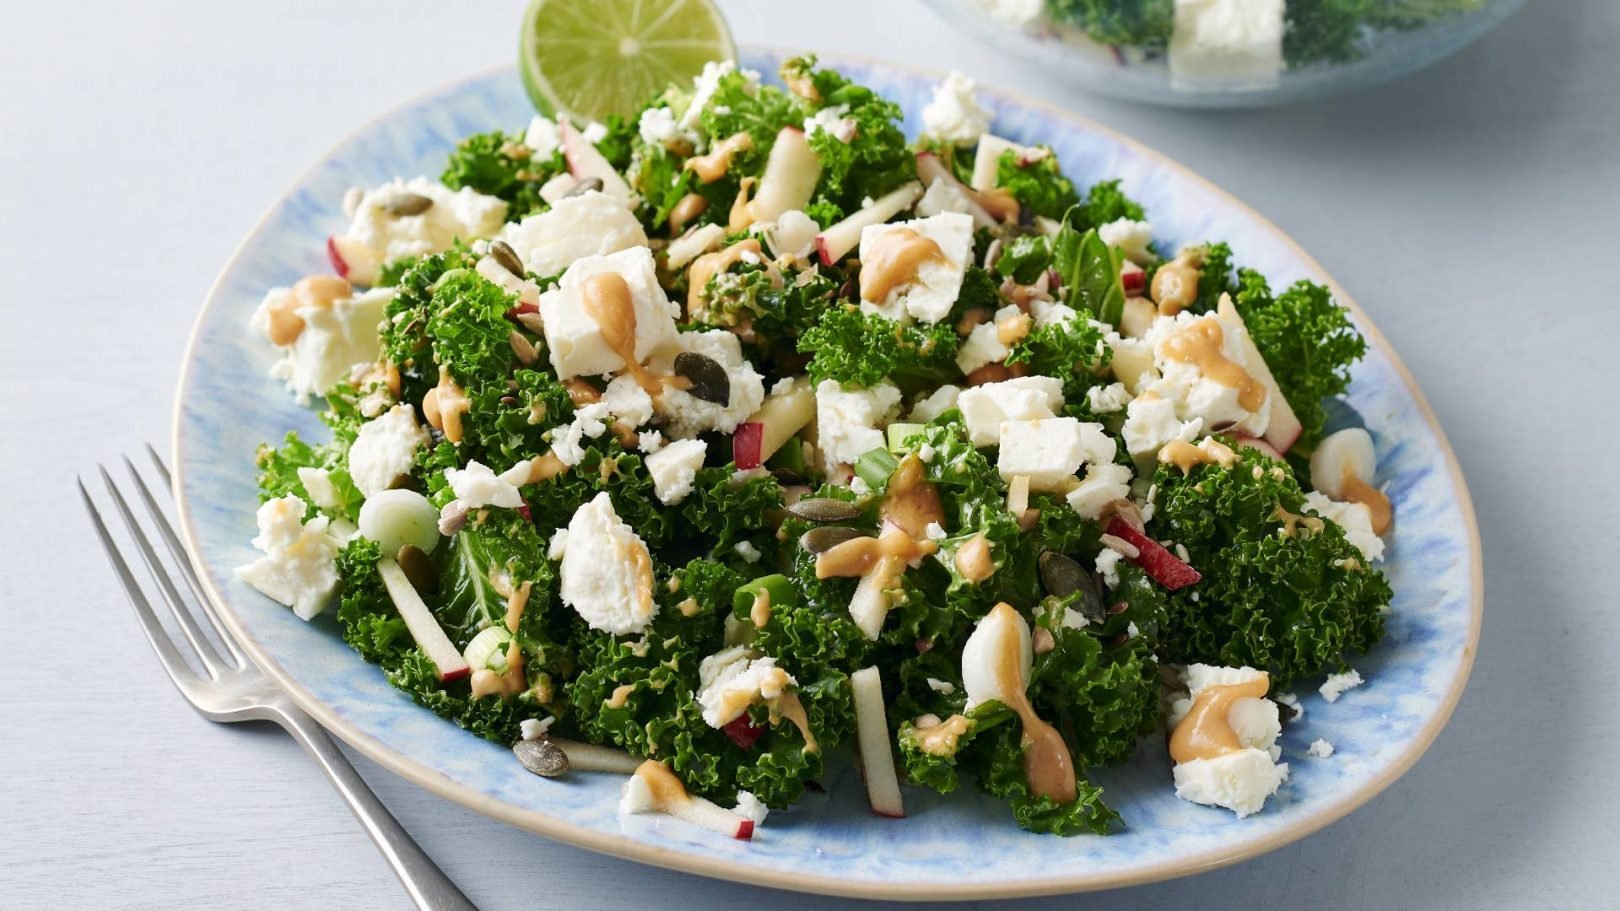 Kale and apple salad with peanut butter dressing